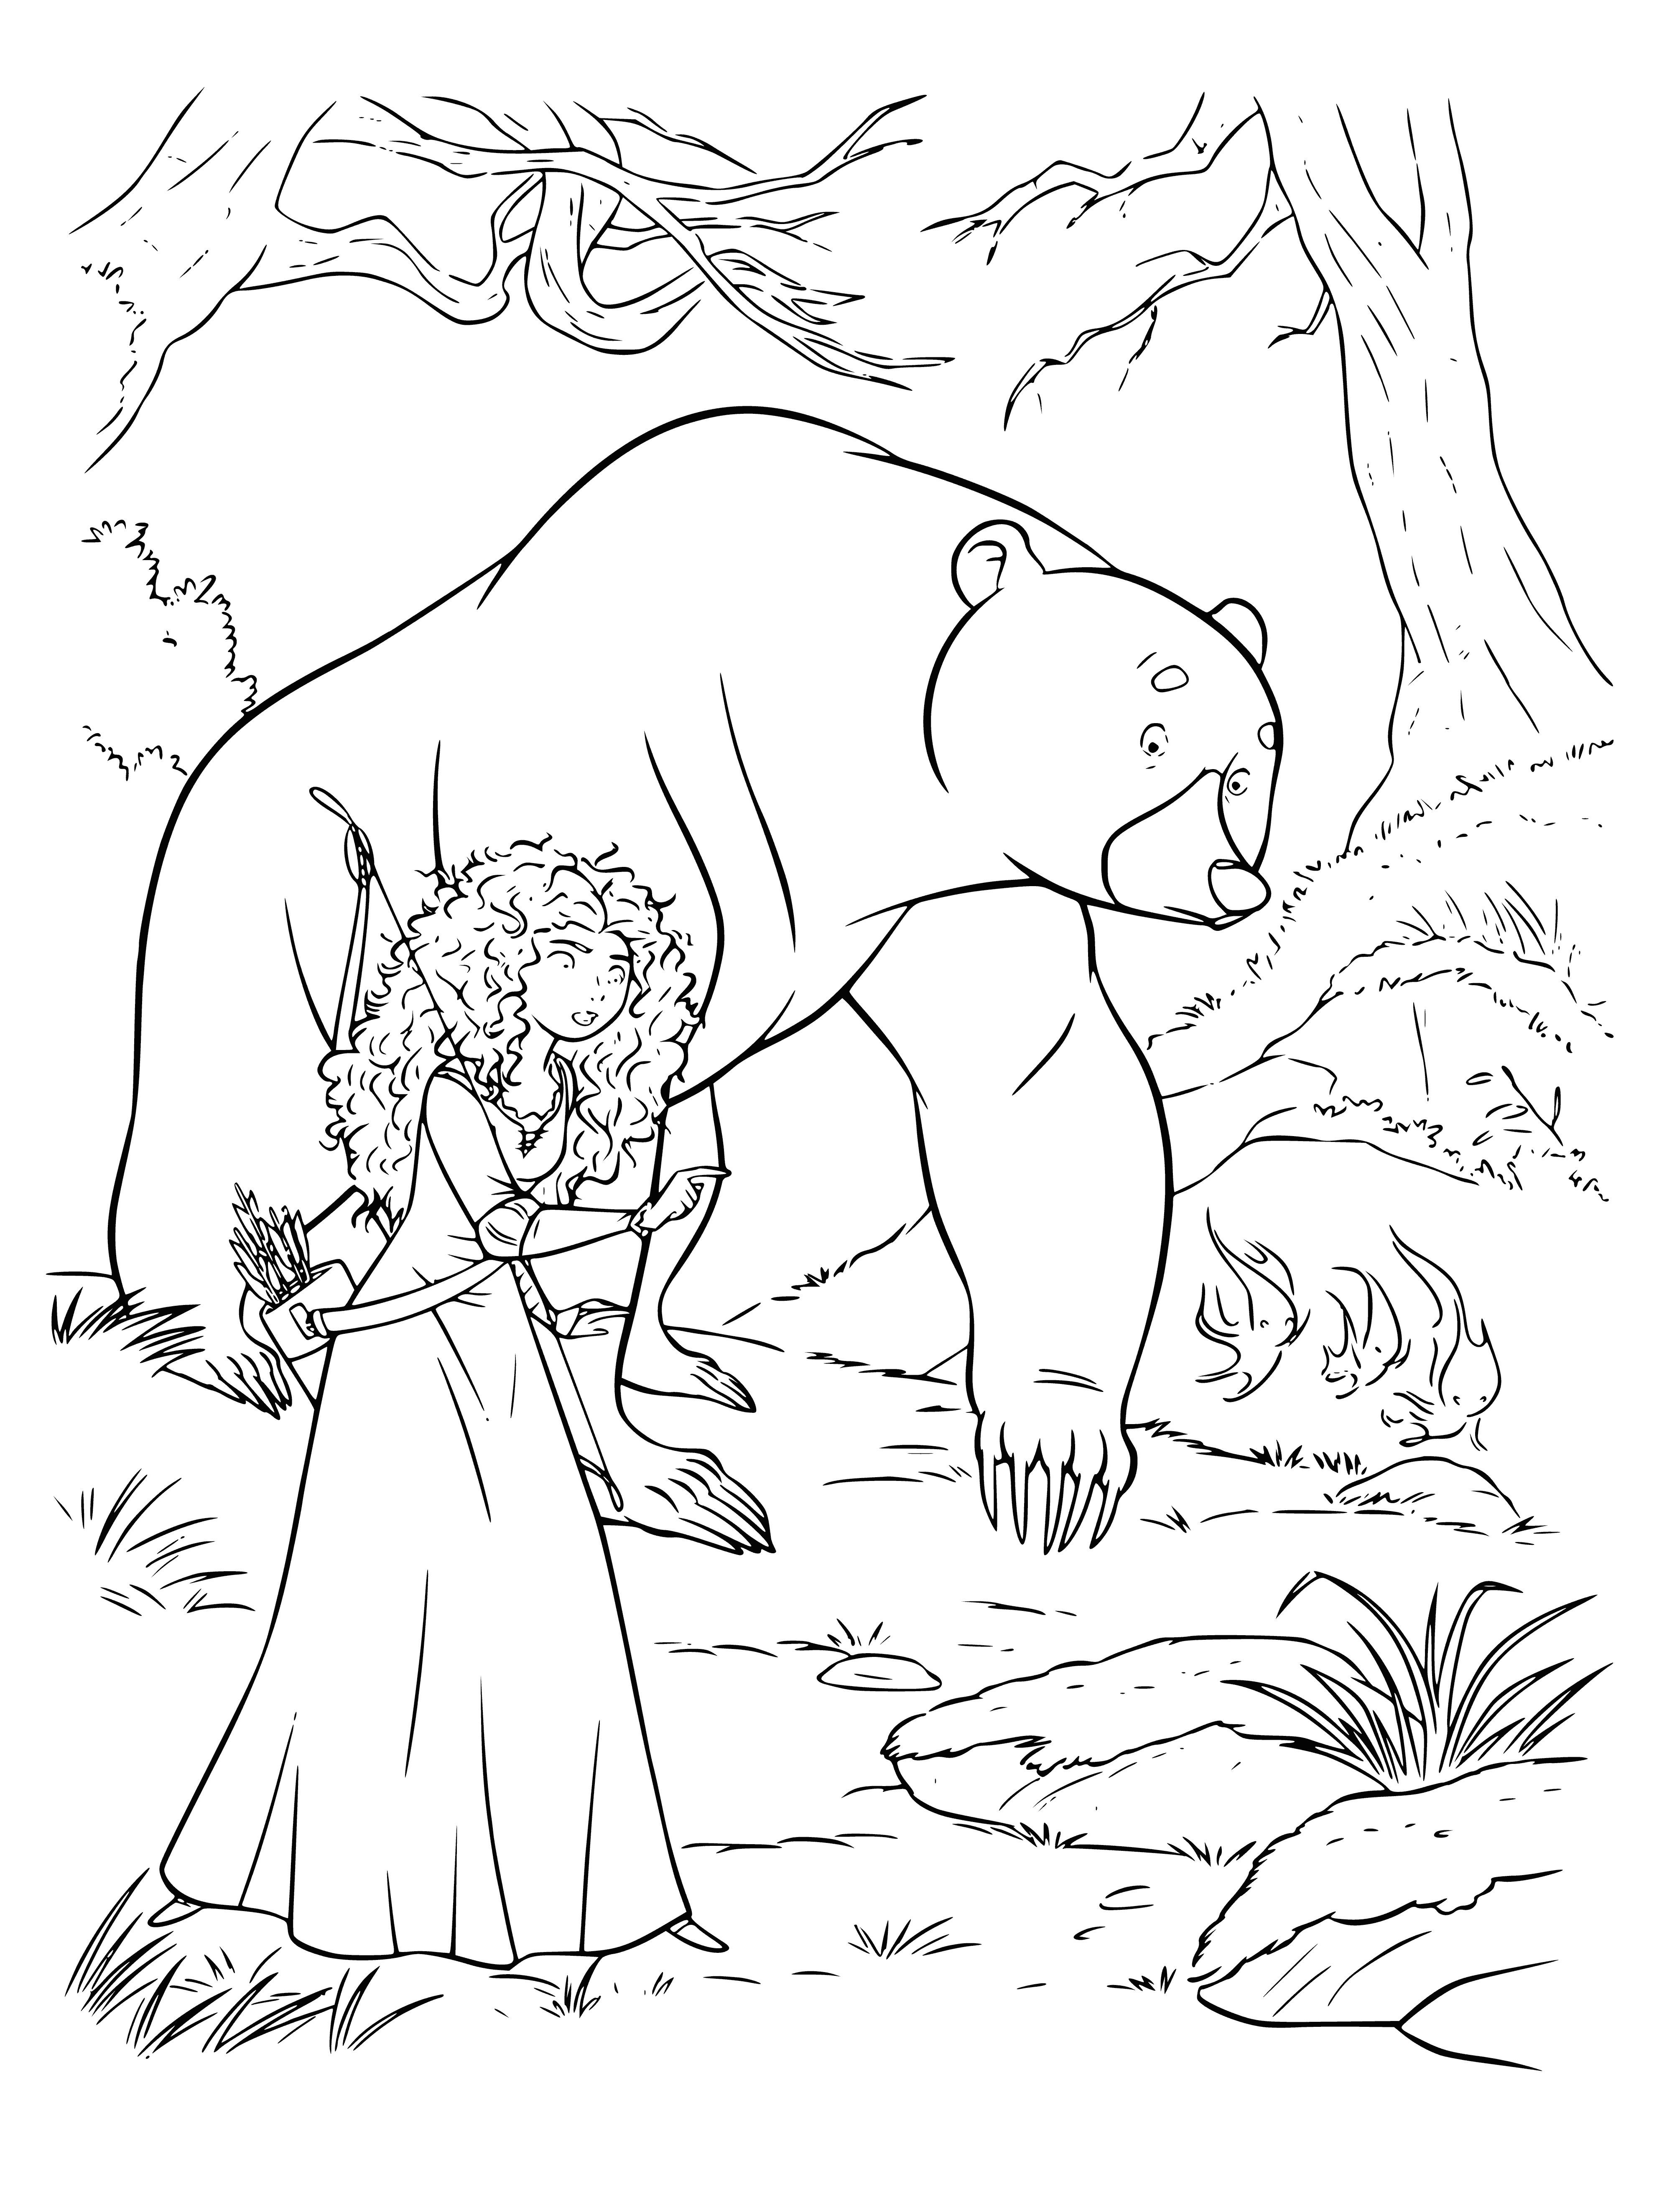 coloring page: In a forest, Merida and a bear walk, looking around; Merida holds a bow and arrow.